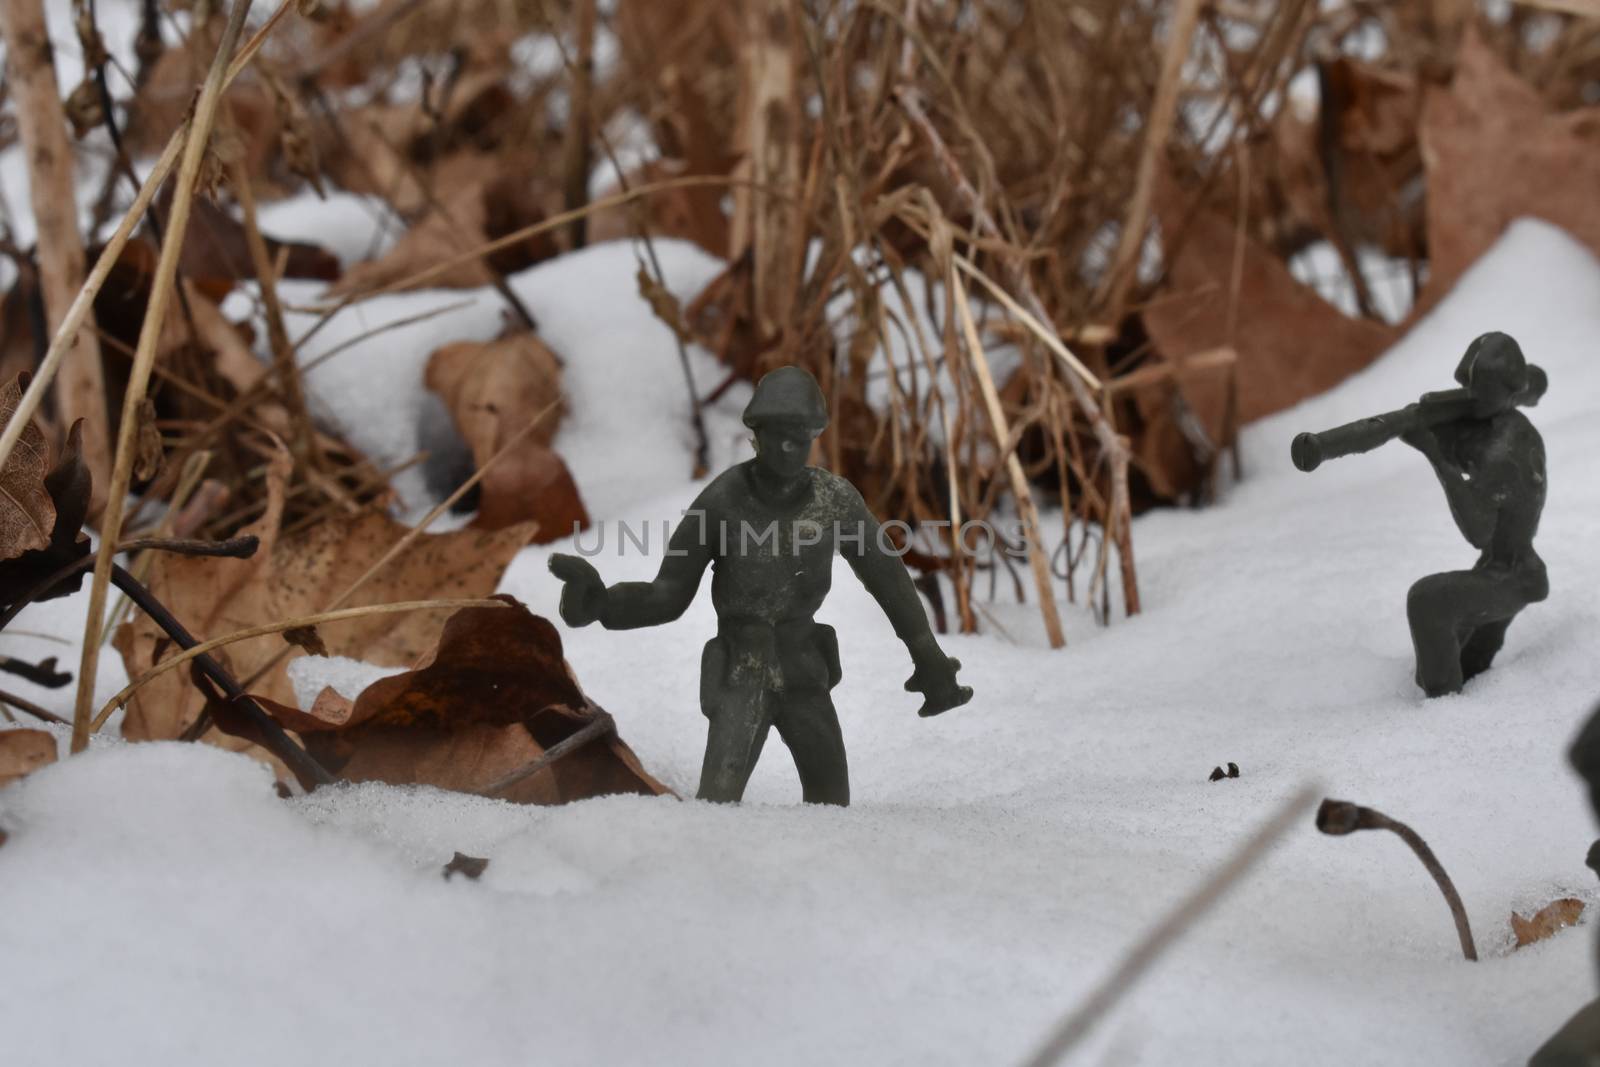 A Toy Soldier Holding a Pistol in a Deep Snowy Field